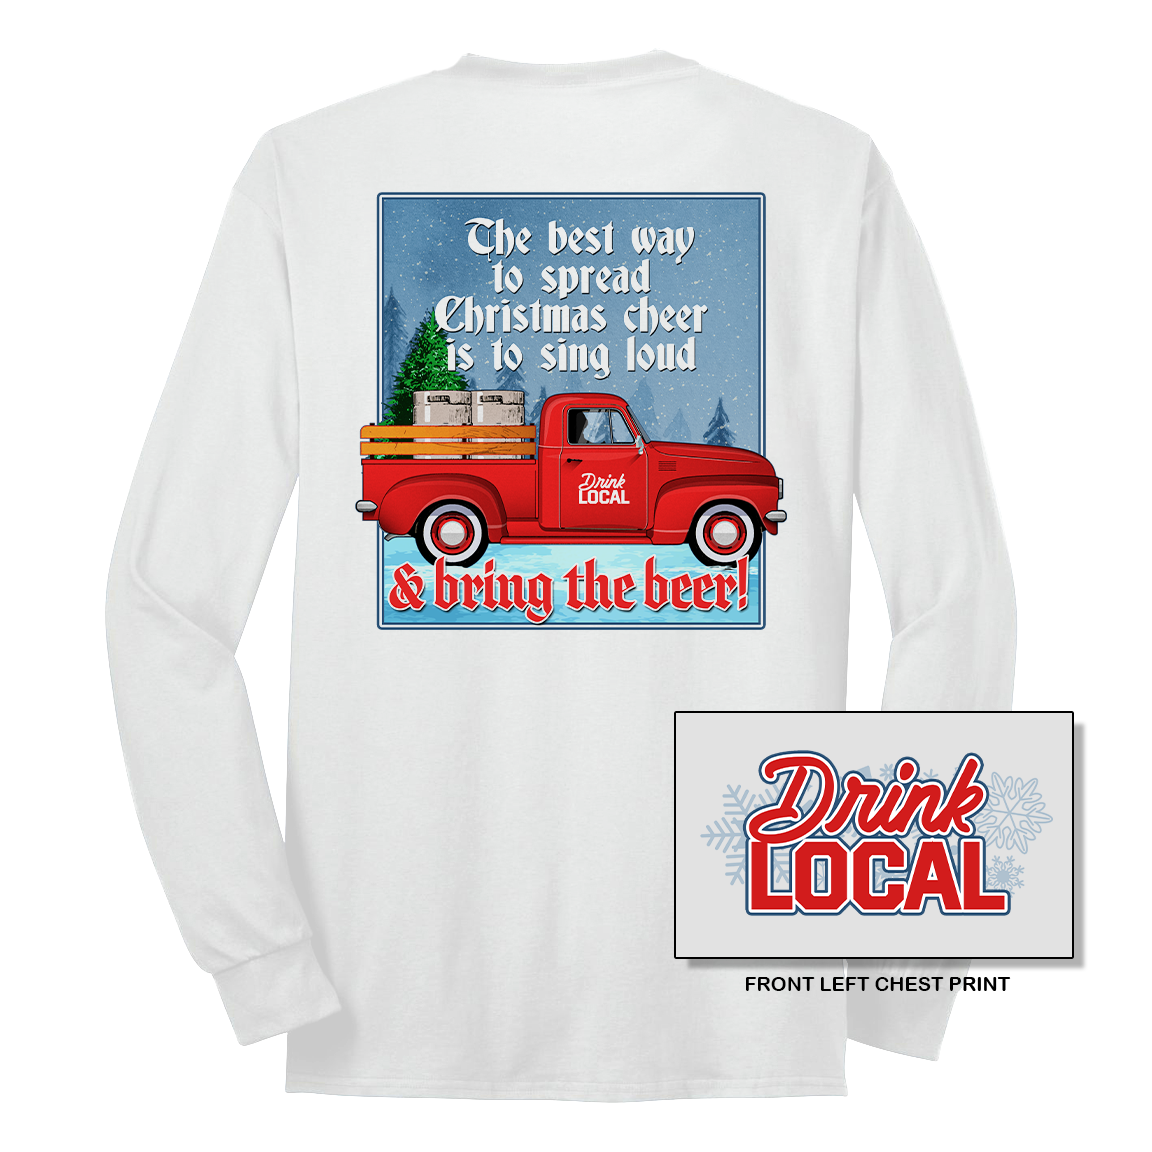 Drink Local Bring the Beer Shirt Truck (Front & Back) - Cincy Shirts